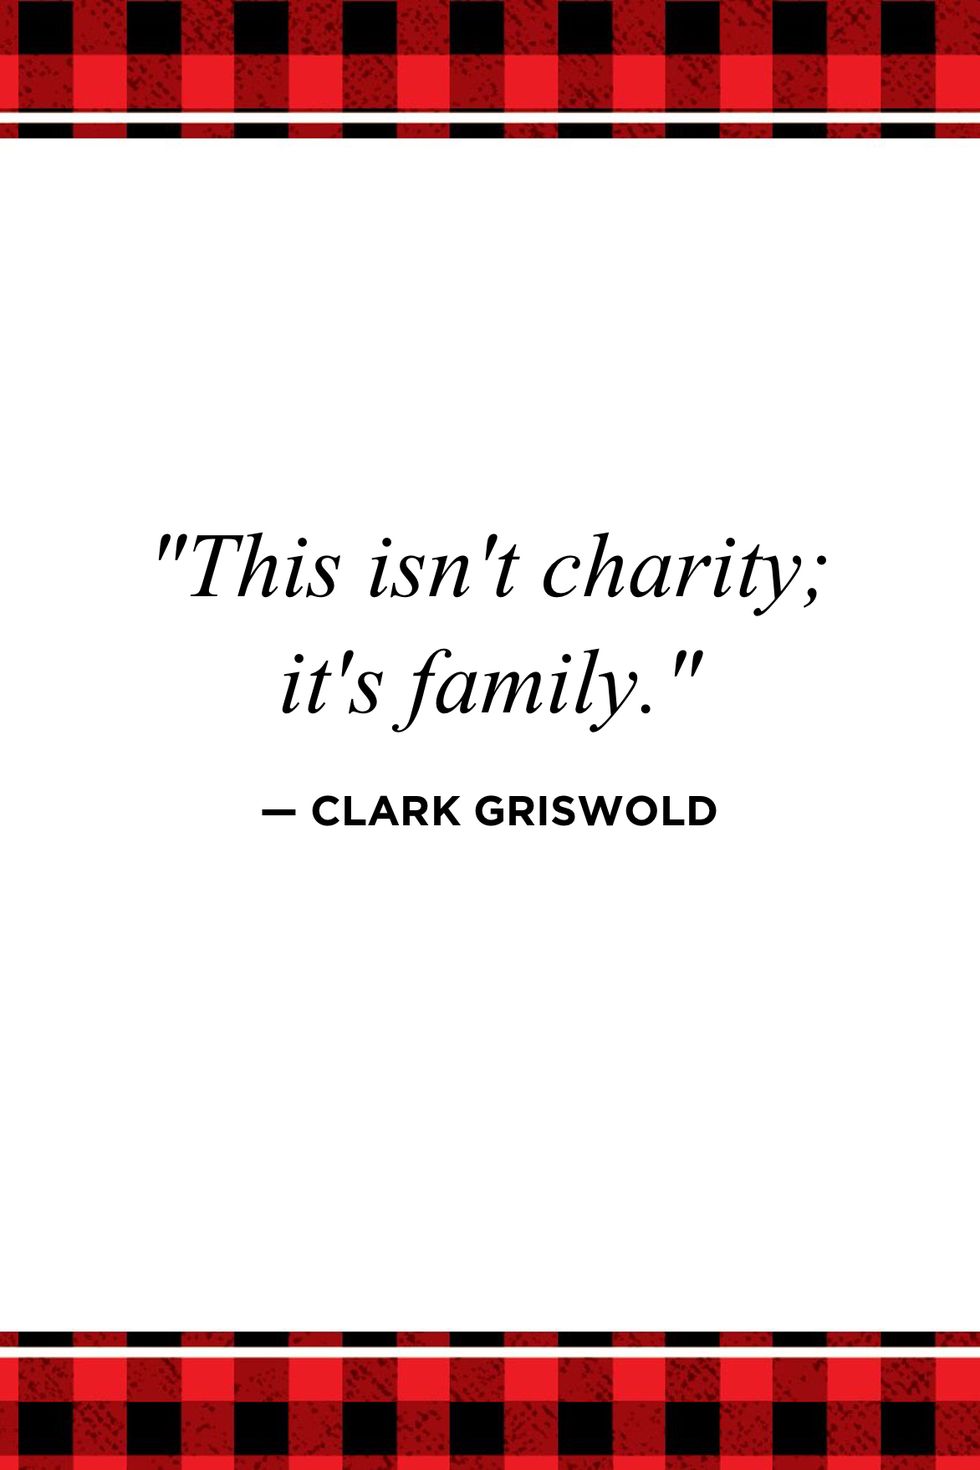 Christmas Vacation Quotes Charity